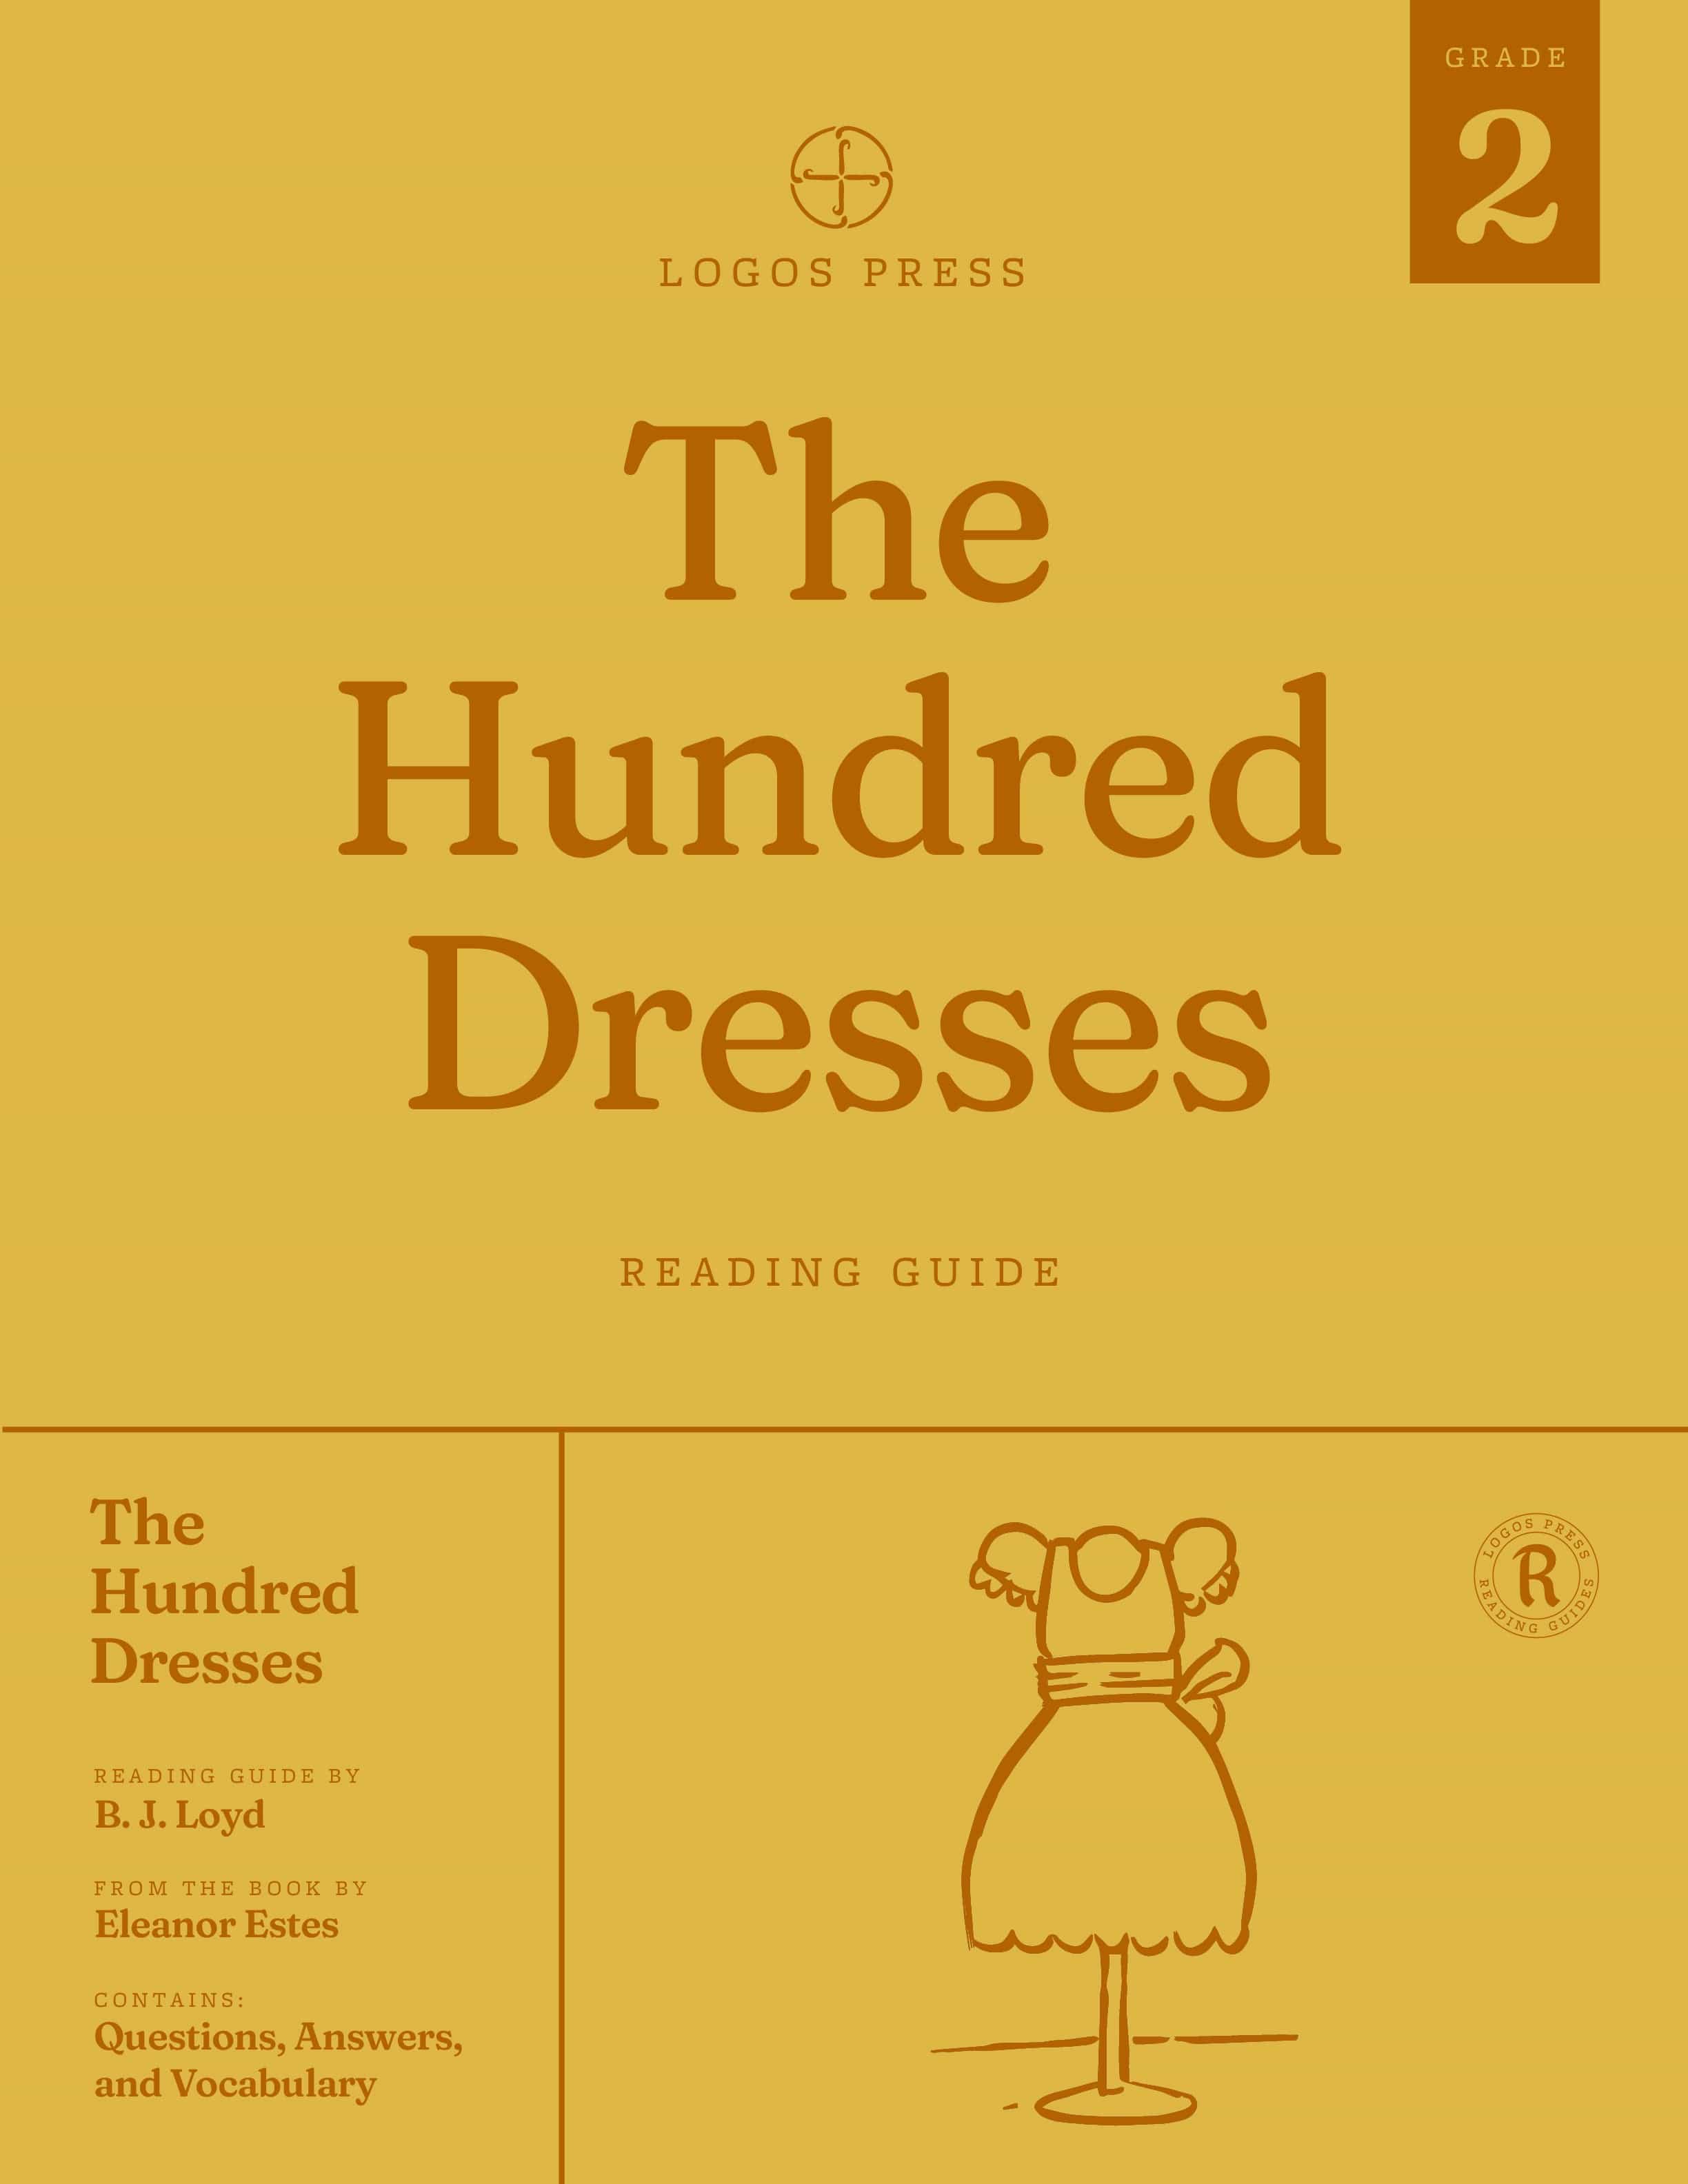 The Hundred Dresses - Reading Guide (Download)